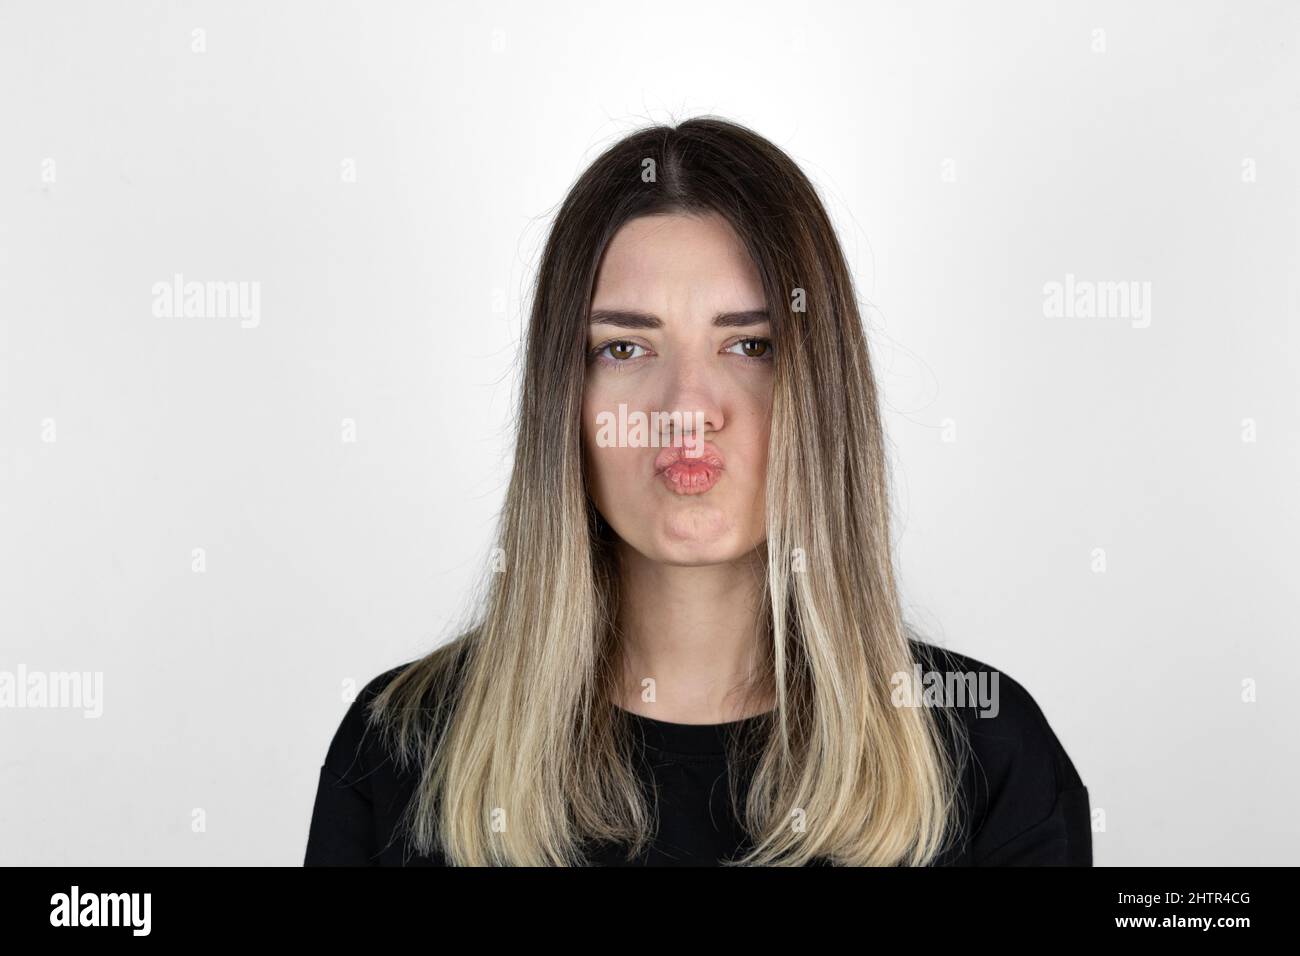 The girl in casual clothes,  pursed lips. White studio background. Stock Photo